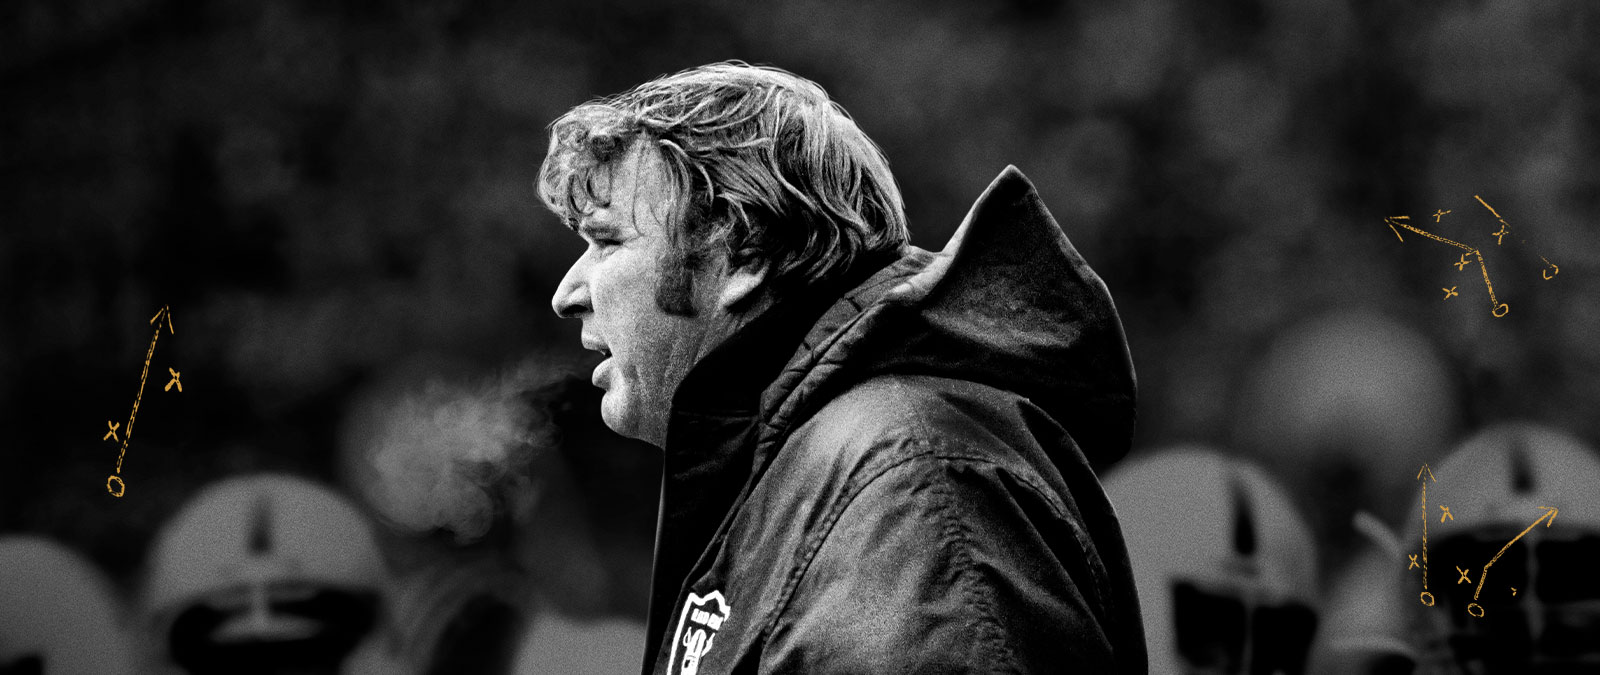 John Madden exhales water vapour in the cold.